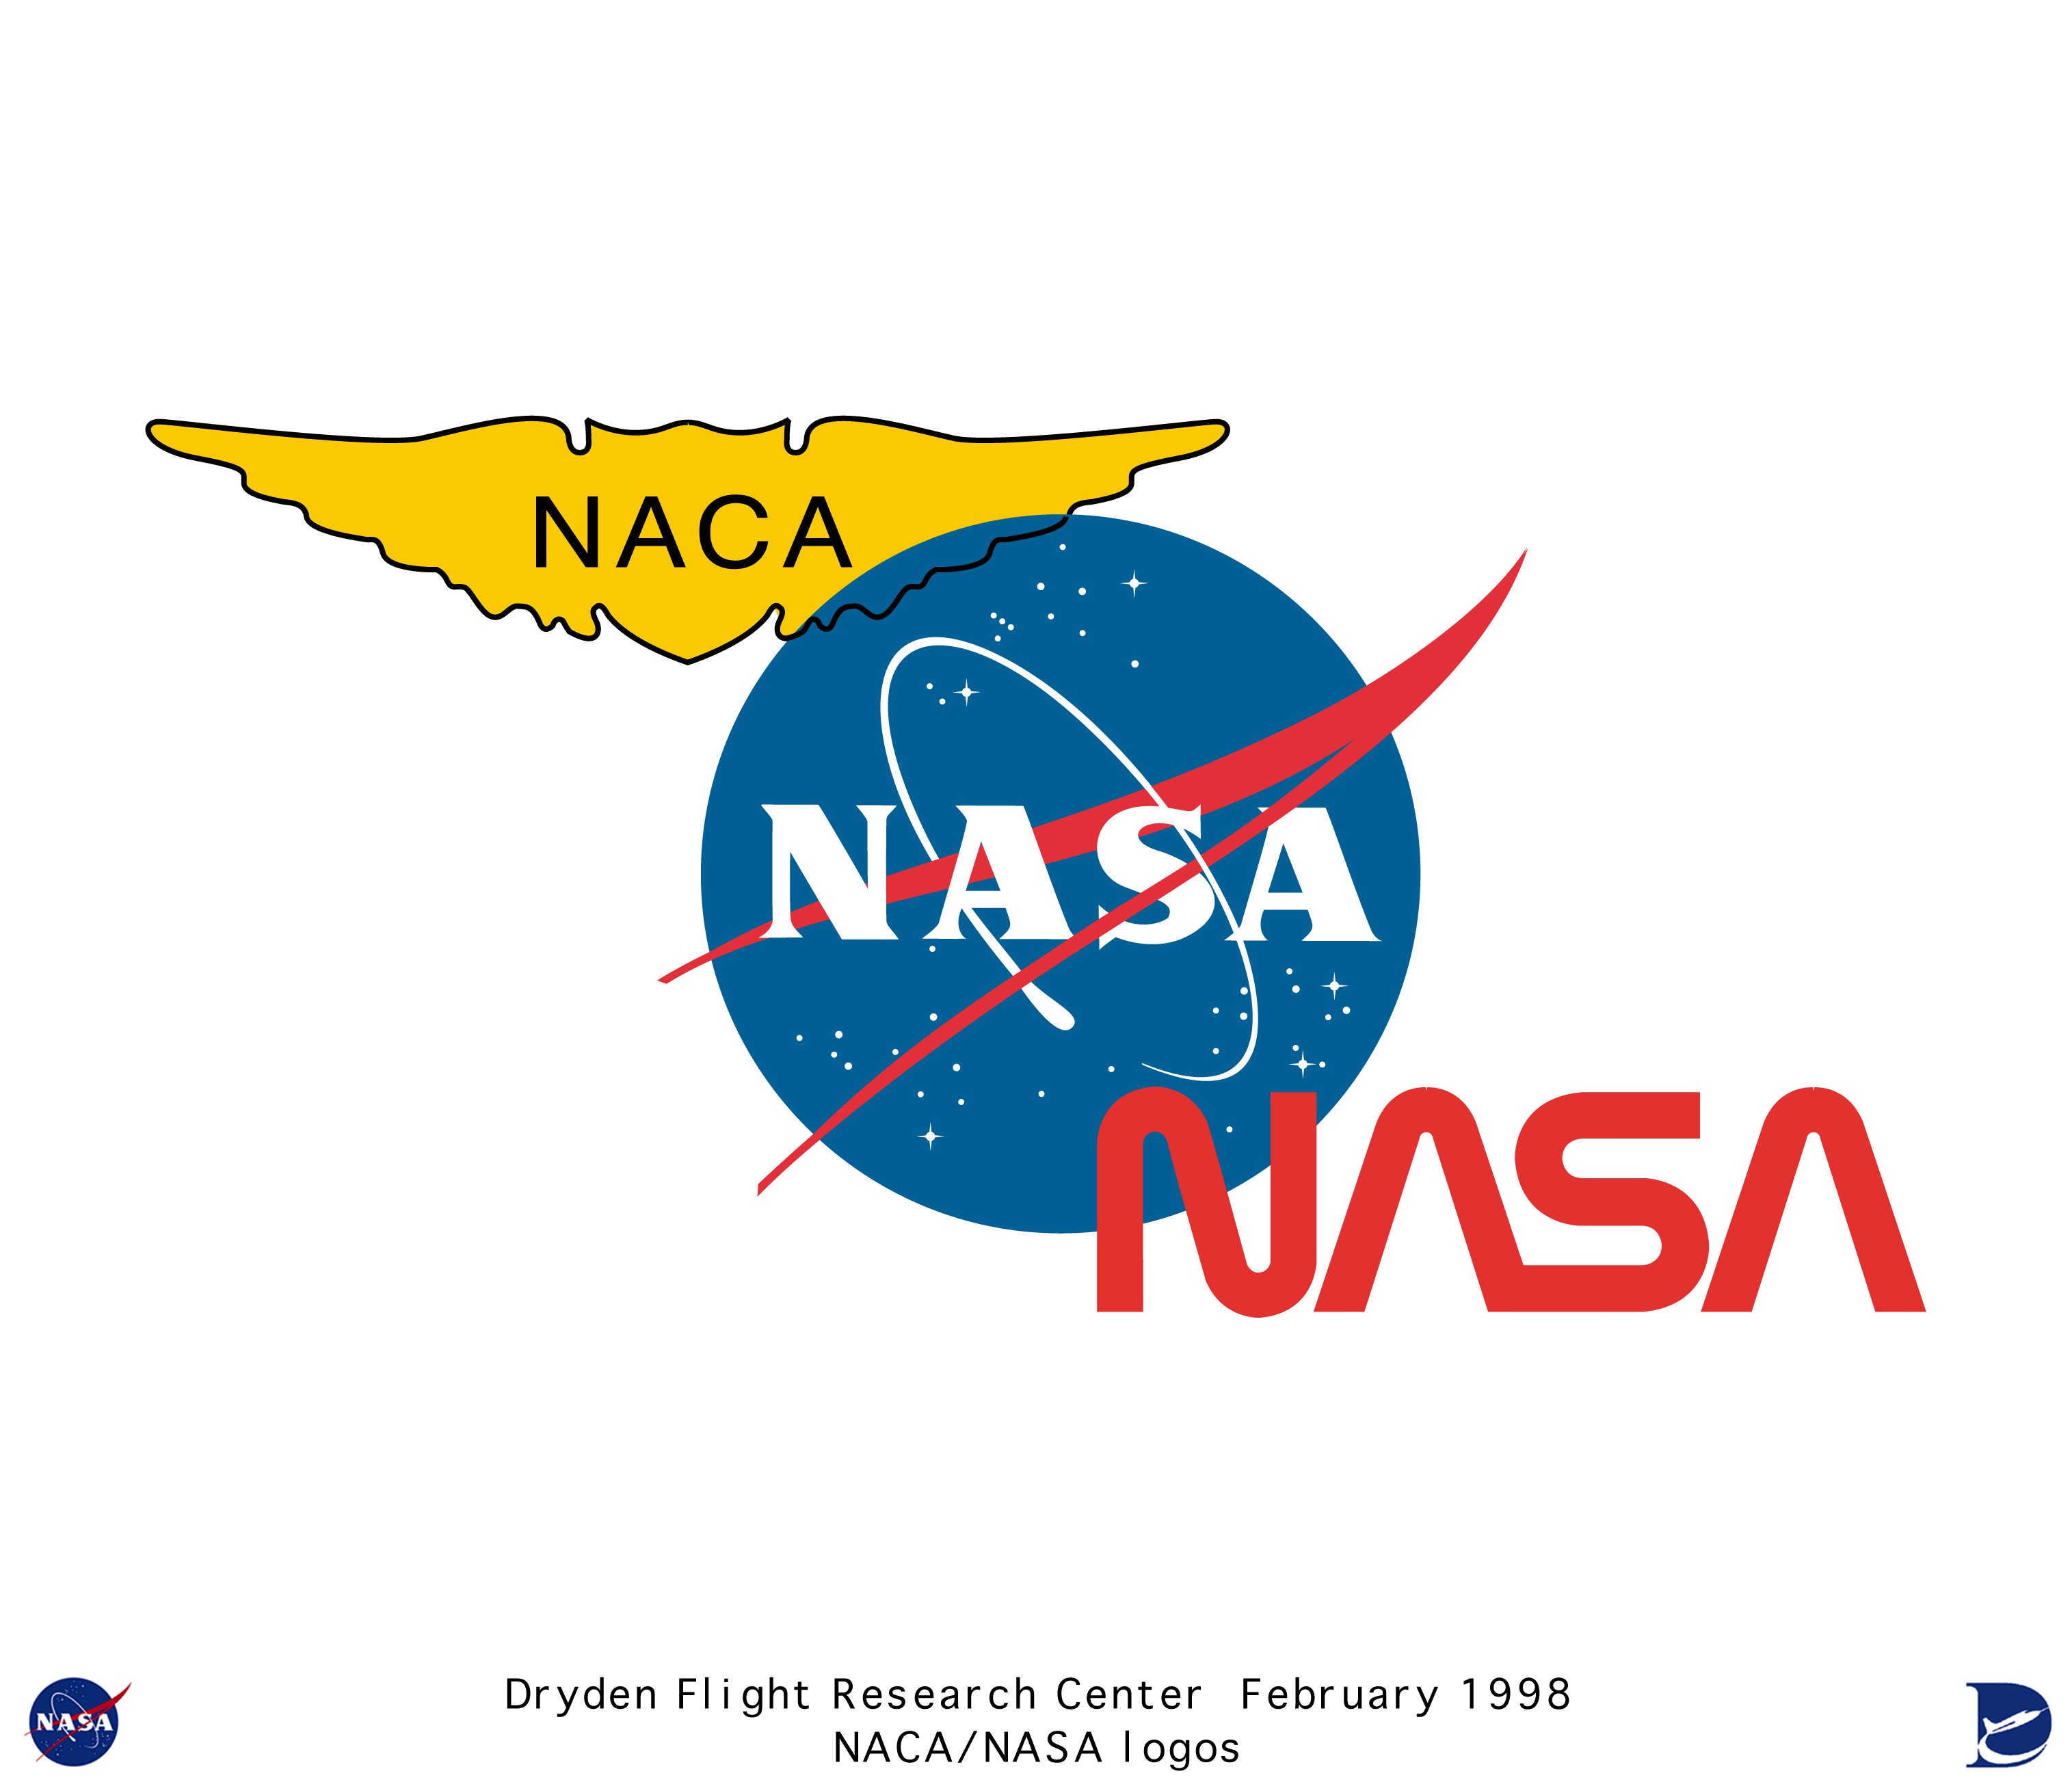 NACA NASA's Old Logo - Ever wanted to know a ton about NASA? Here's how - Album on Imgur